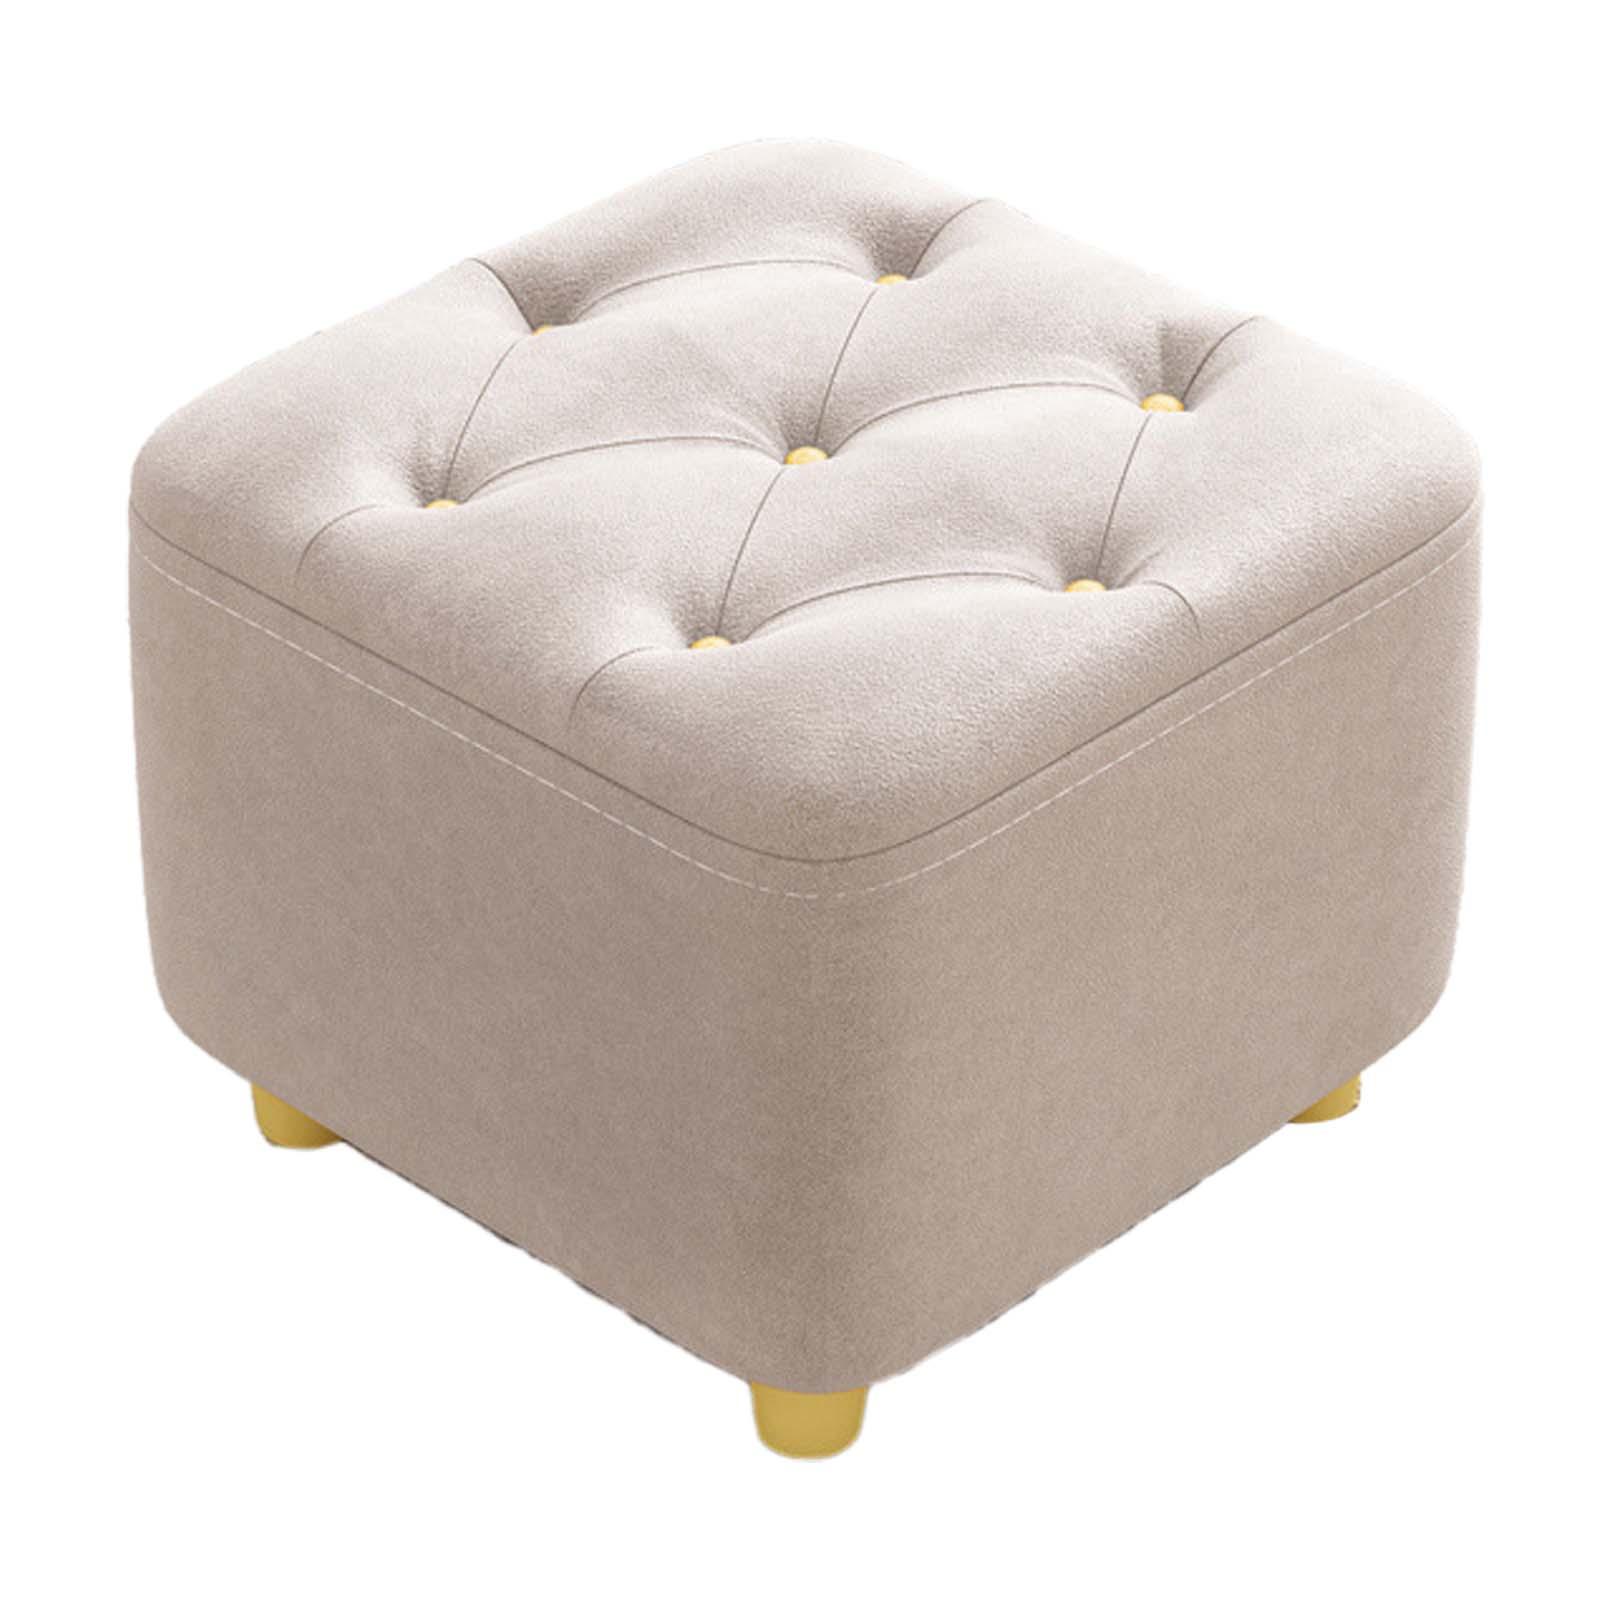 Square Footstool Foot Stool Comfortable Stepstool Creative Ottoman Stool Footrest for Living Room Dressing Room Bedroom Couch beige - image 1 of 8